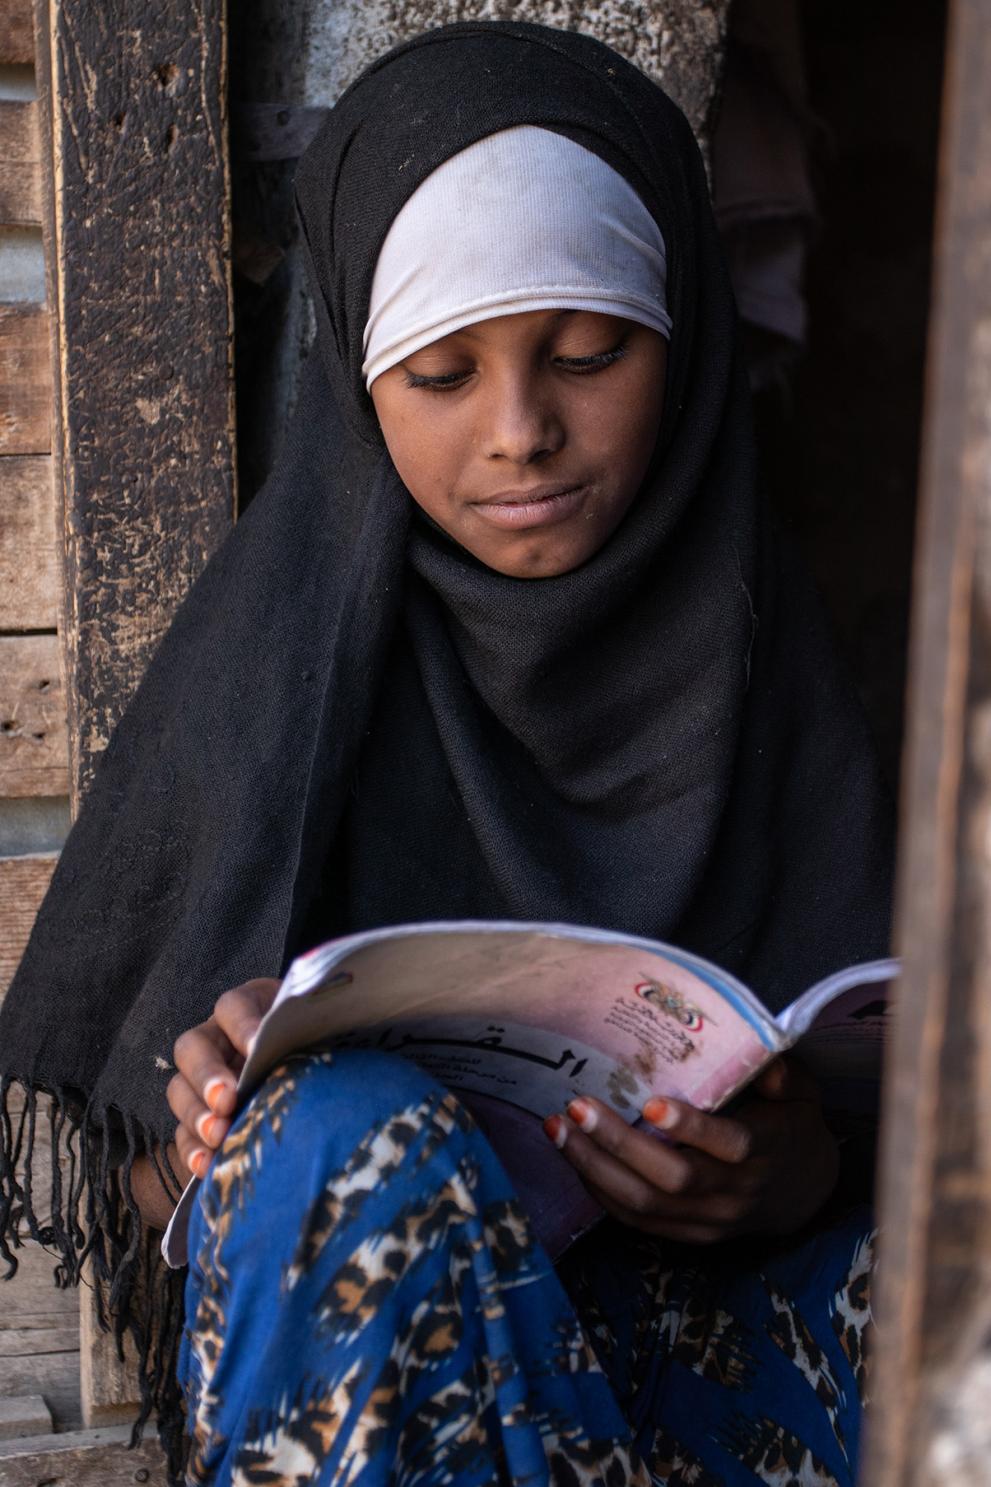 Na’aem reading in one of her schoolbooks